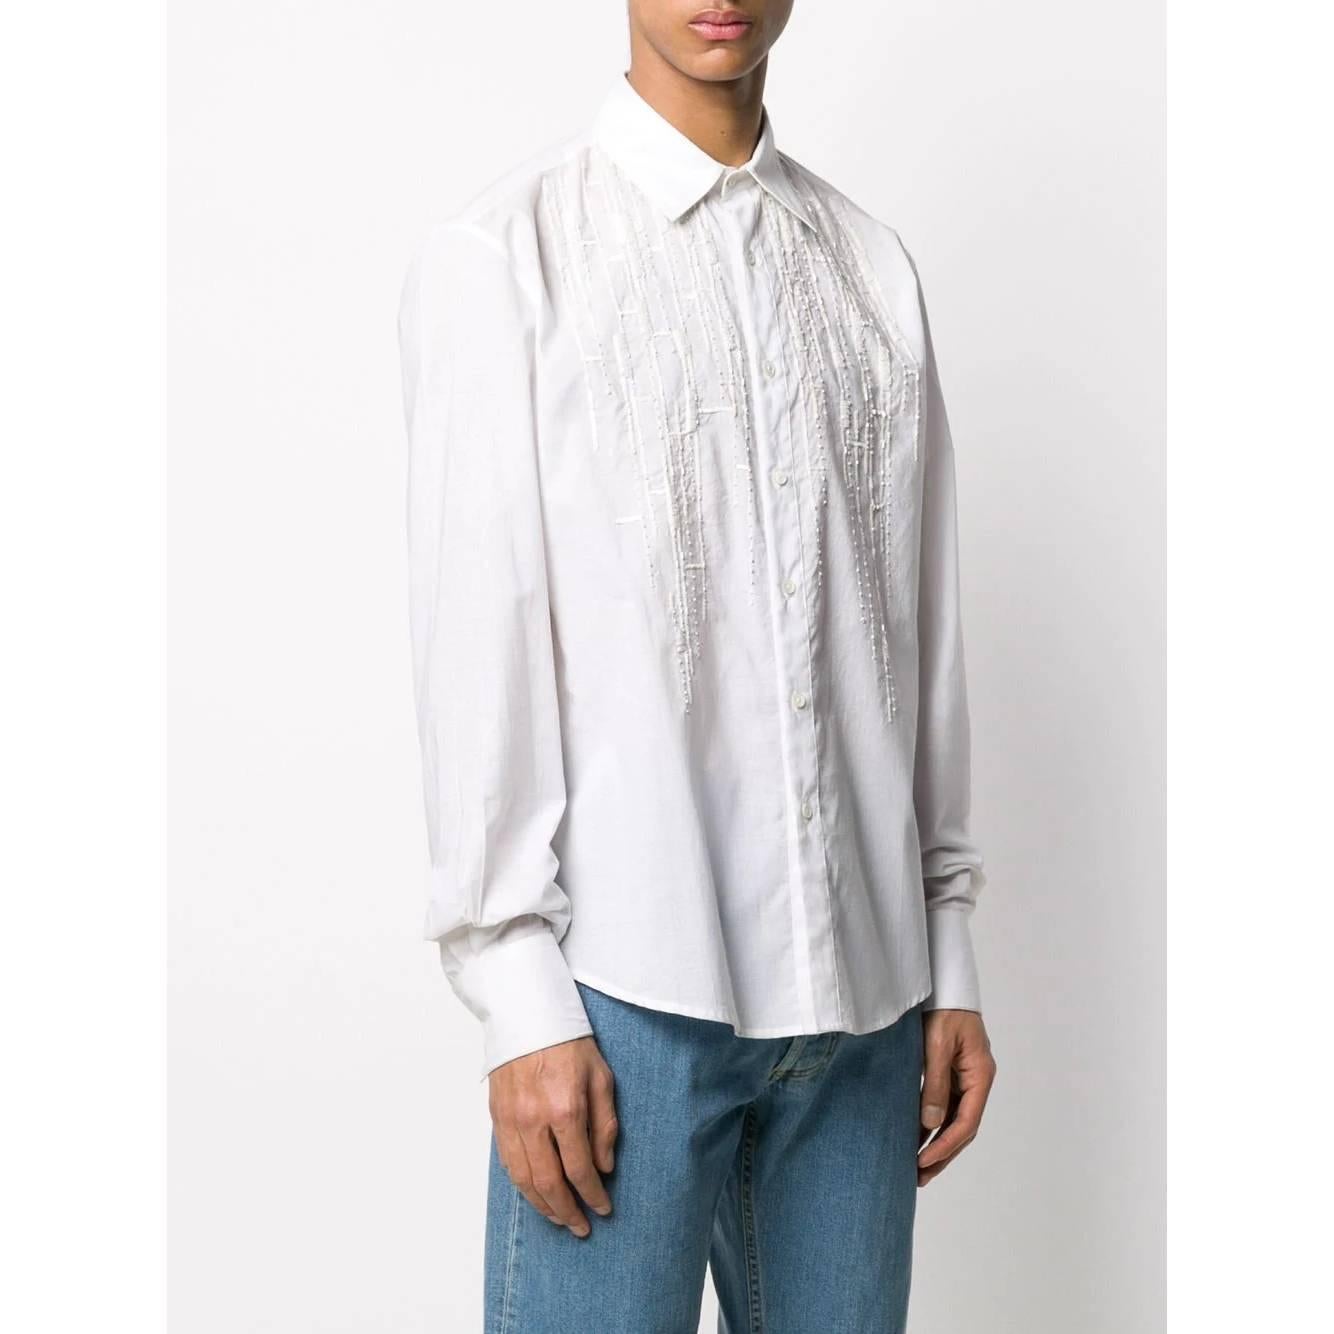 Gianfranco Ferré optic white cotton shirt. It features a straight fit, a classic collar, sequins and beads embroideries on the chest, long sleeves, buttoned cuffs, a front button fastening and a curved hemline.

The item shows some missing sequins,